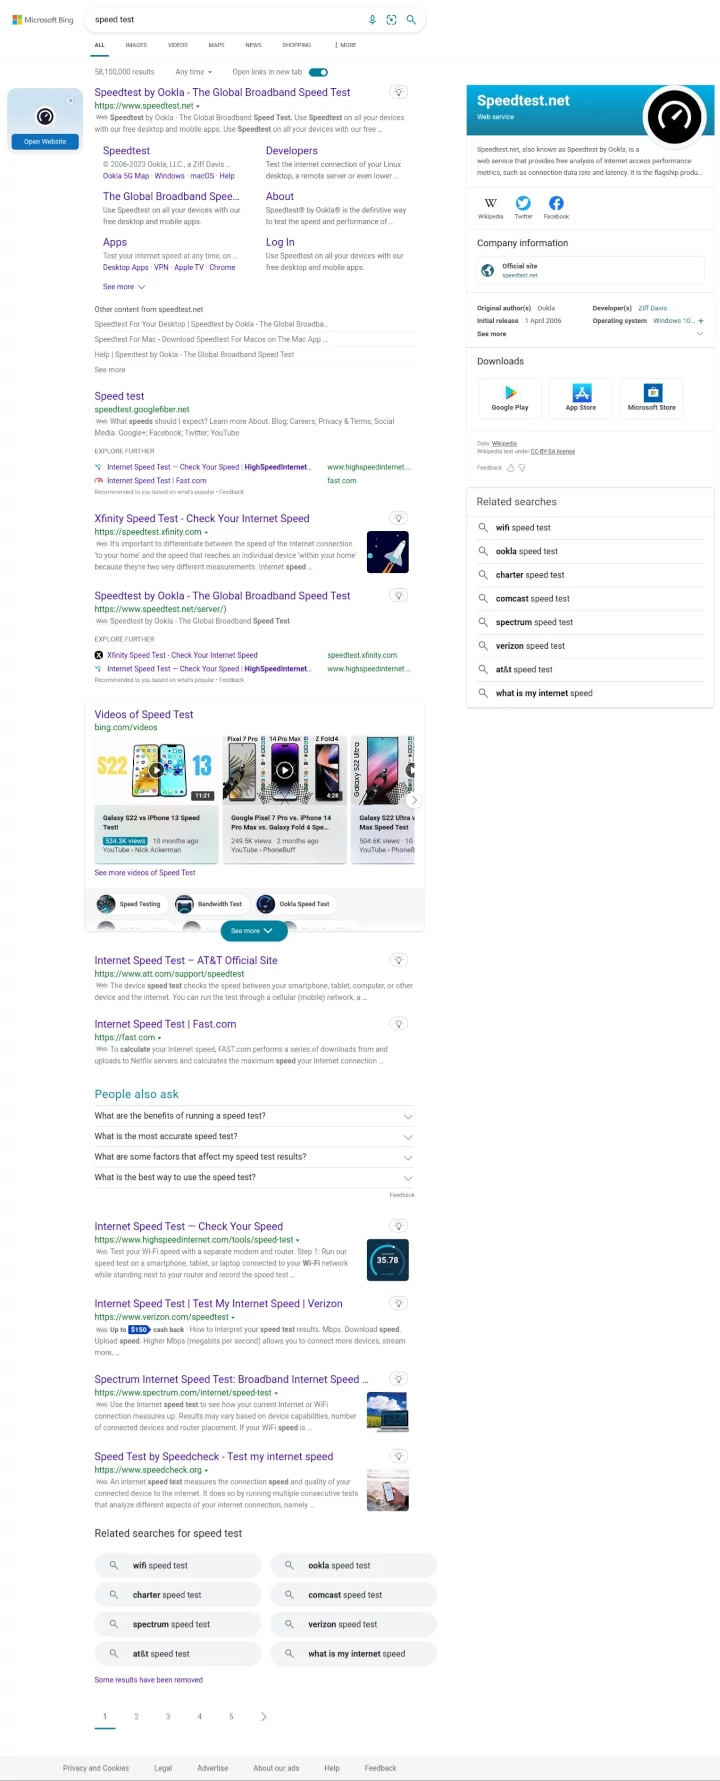 Bing's result page when searching for speed test (january 10)